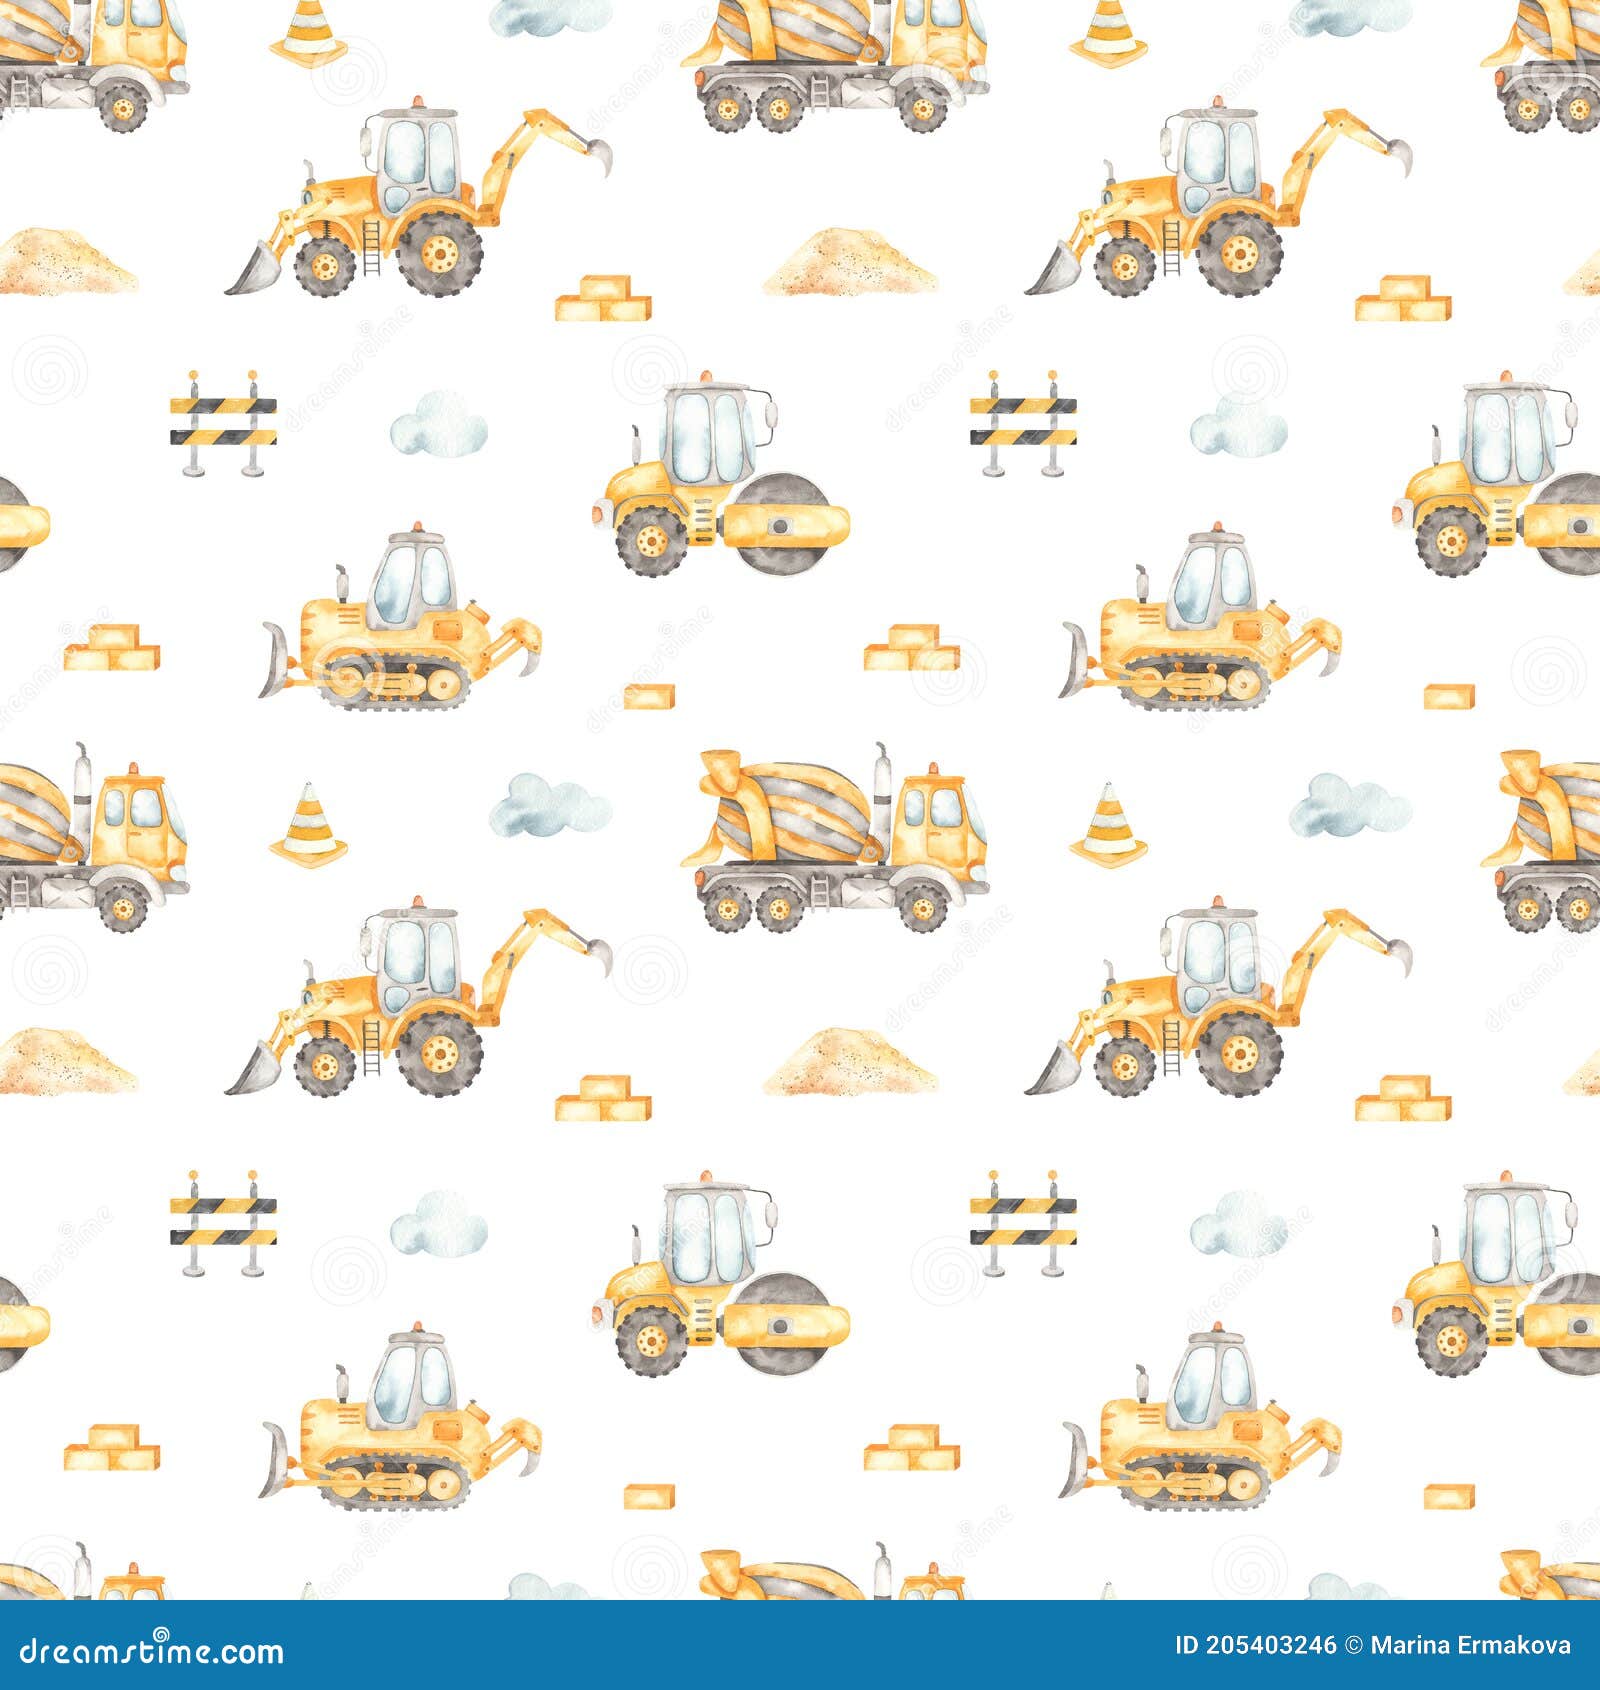 watercolor seamless pattern with construction vehicles, concrete truck, bulldozer, road roller, tractor on a white background